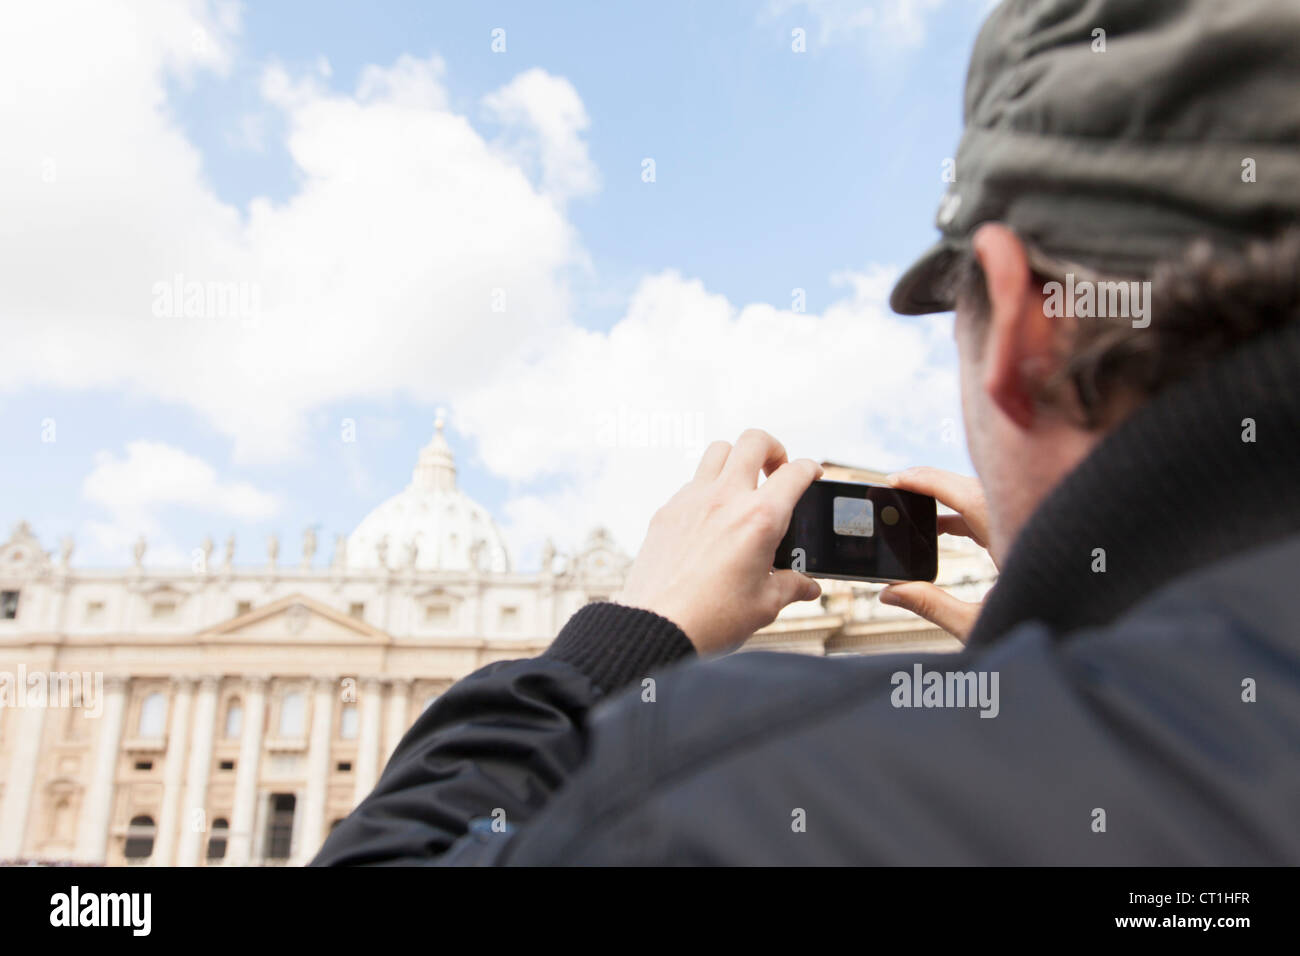 Man taking picture of ornate building Banque D'Images